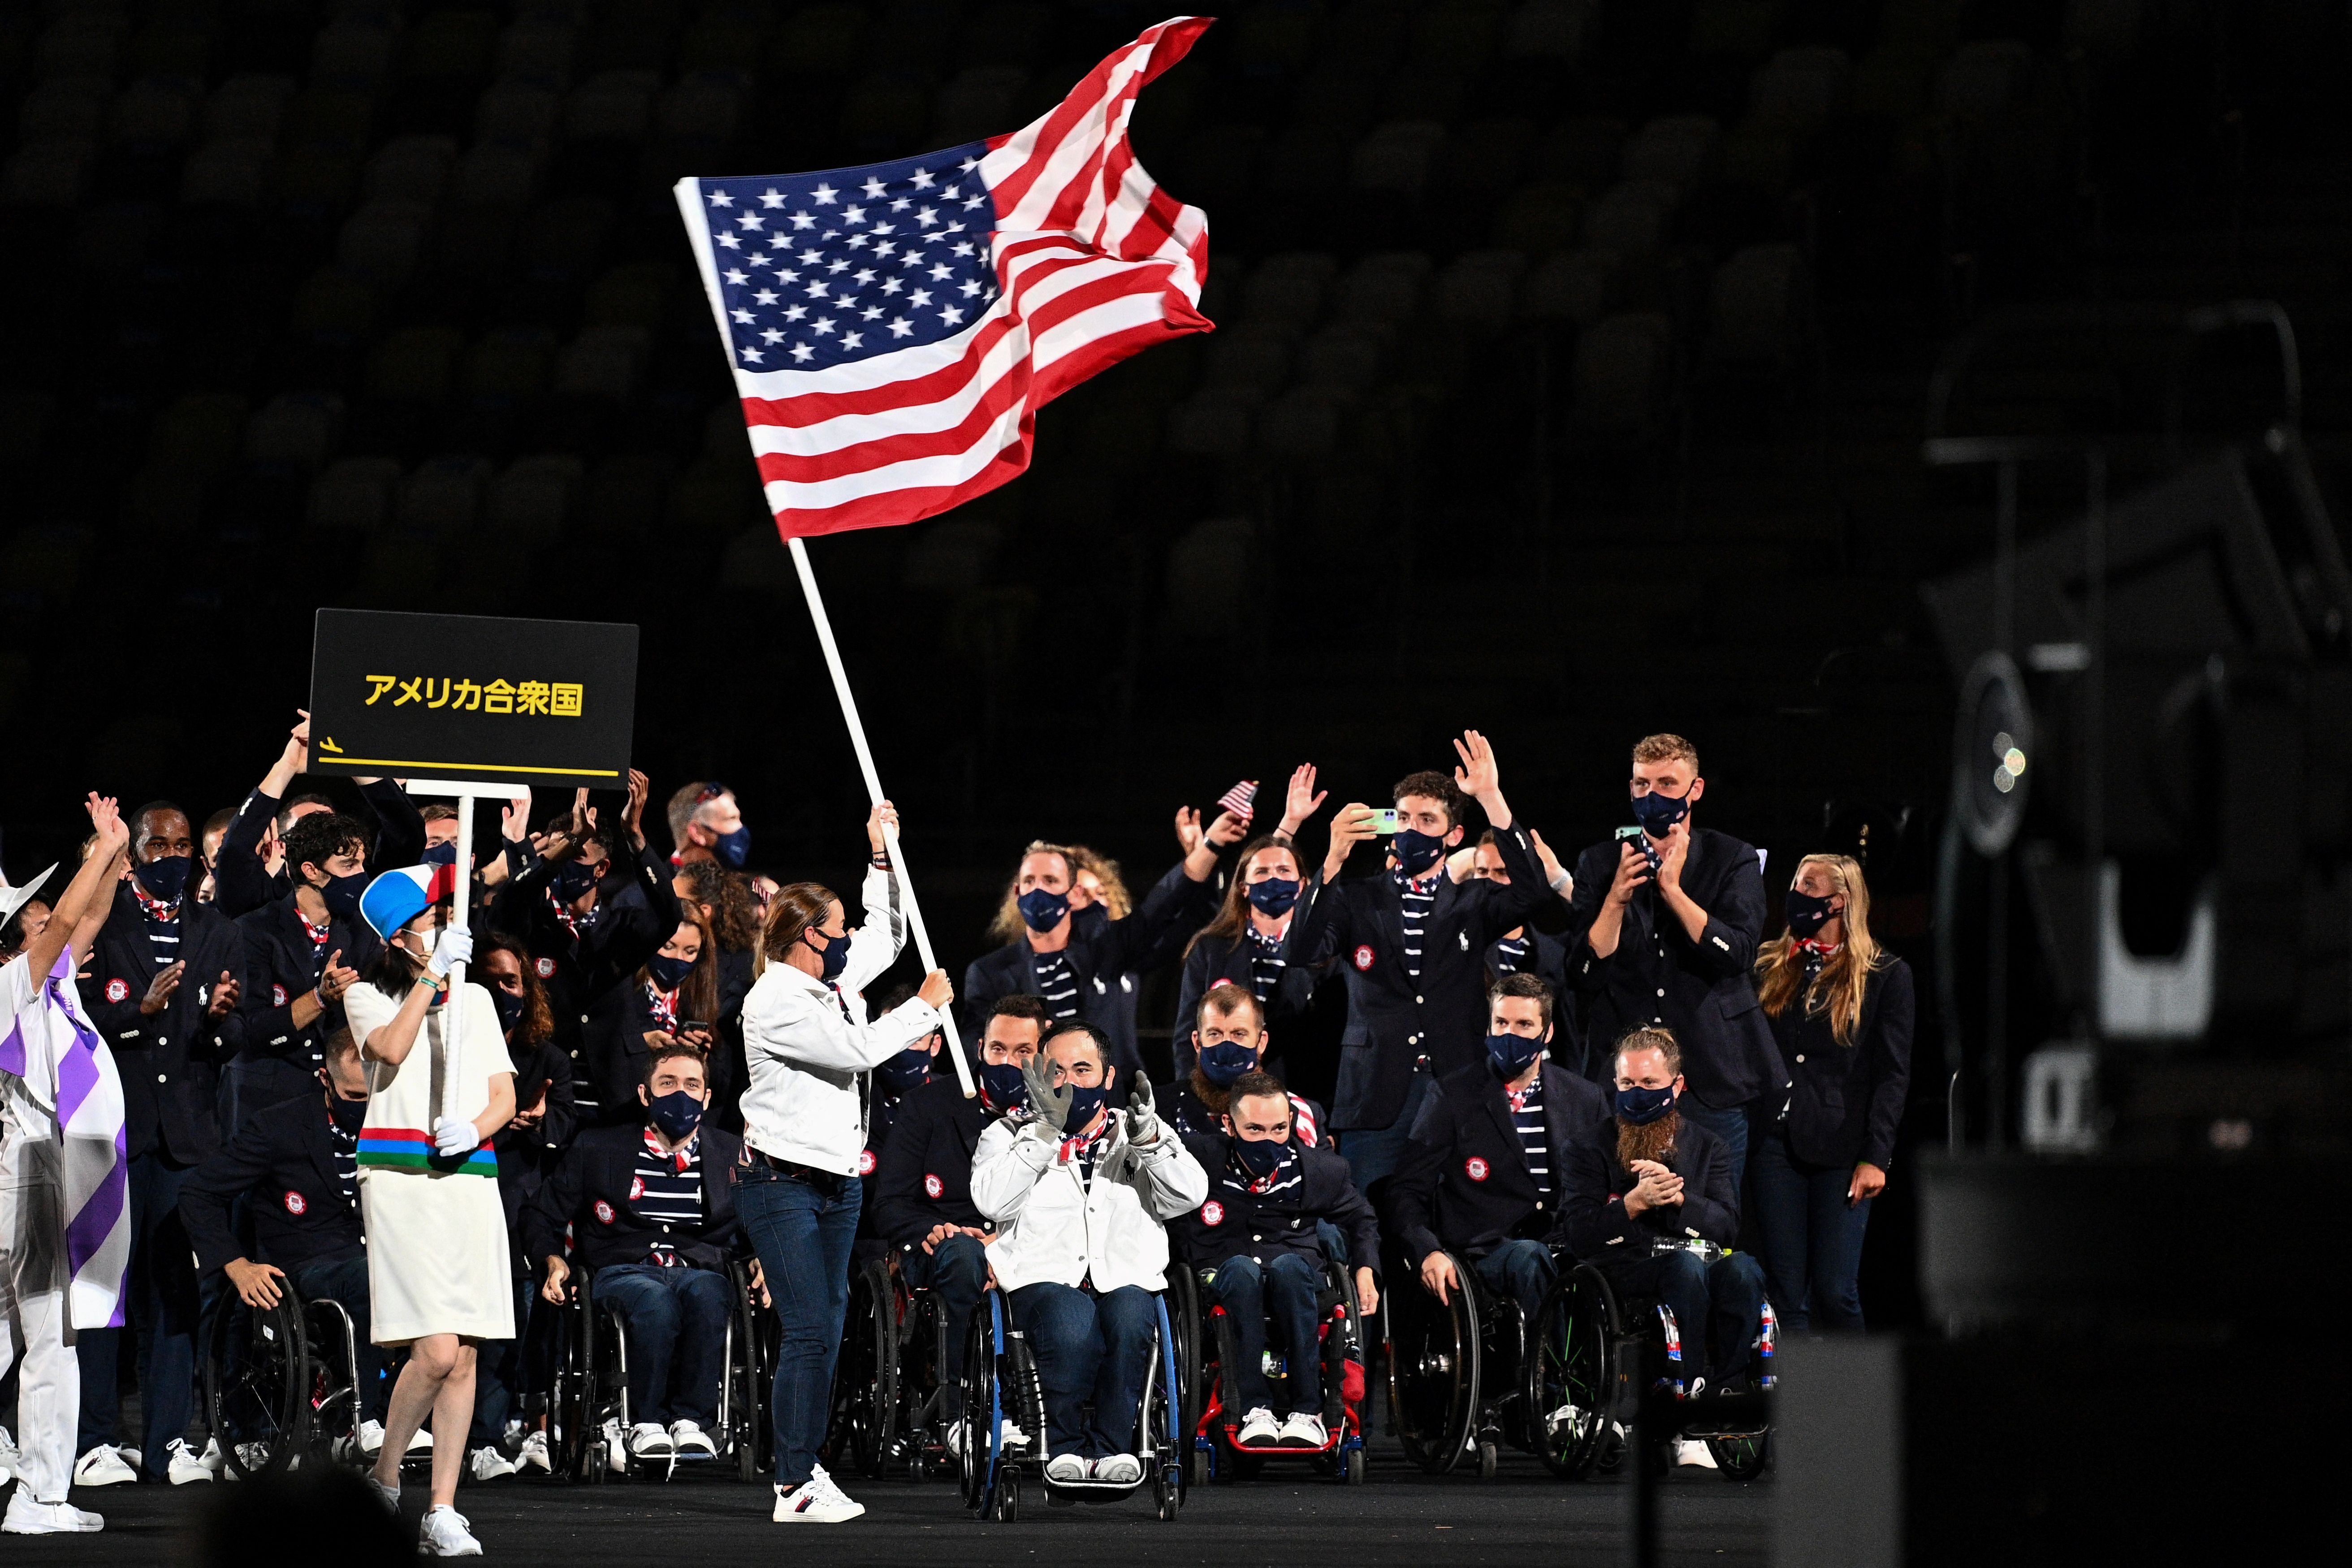 Team USA arrives during the opening ceremony for the Tokyo 2020 Paralympic Games at the Olympic Stadium in Tokyo on August 24, 2021. Photo: Philip Fong/AFP via Getty Images